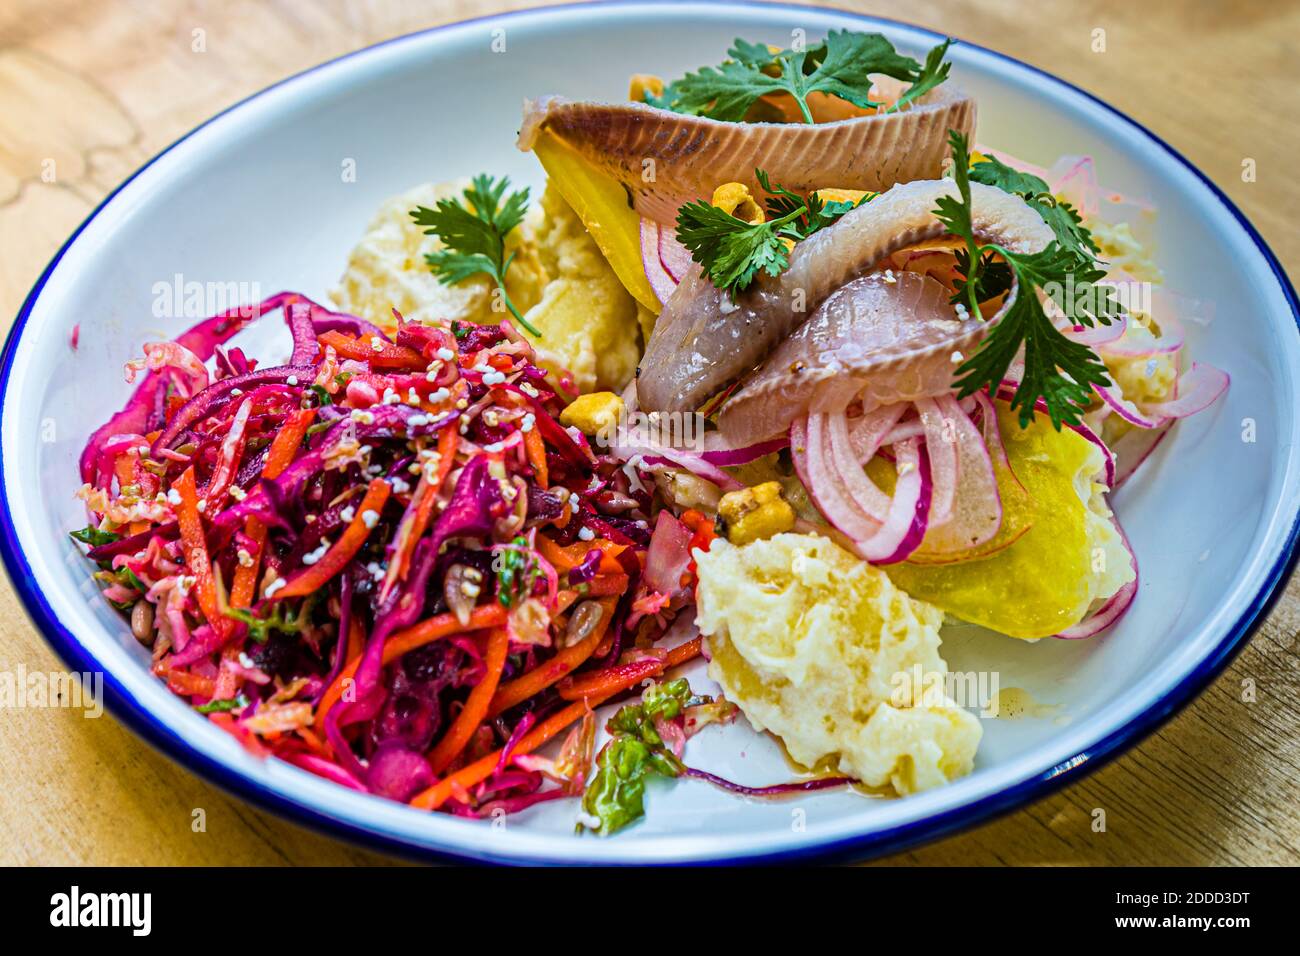 Ceviche St. Heinrich, a potato salad with wasabi and yoghurt dressing, fish from Lake Starnberg, marinated beets, fried corn, onions and tiger milk in München, Germany Stock Photo